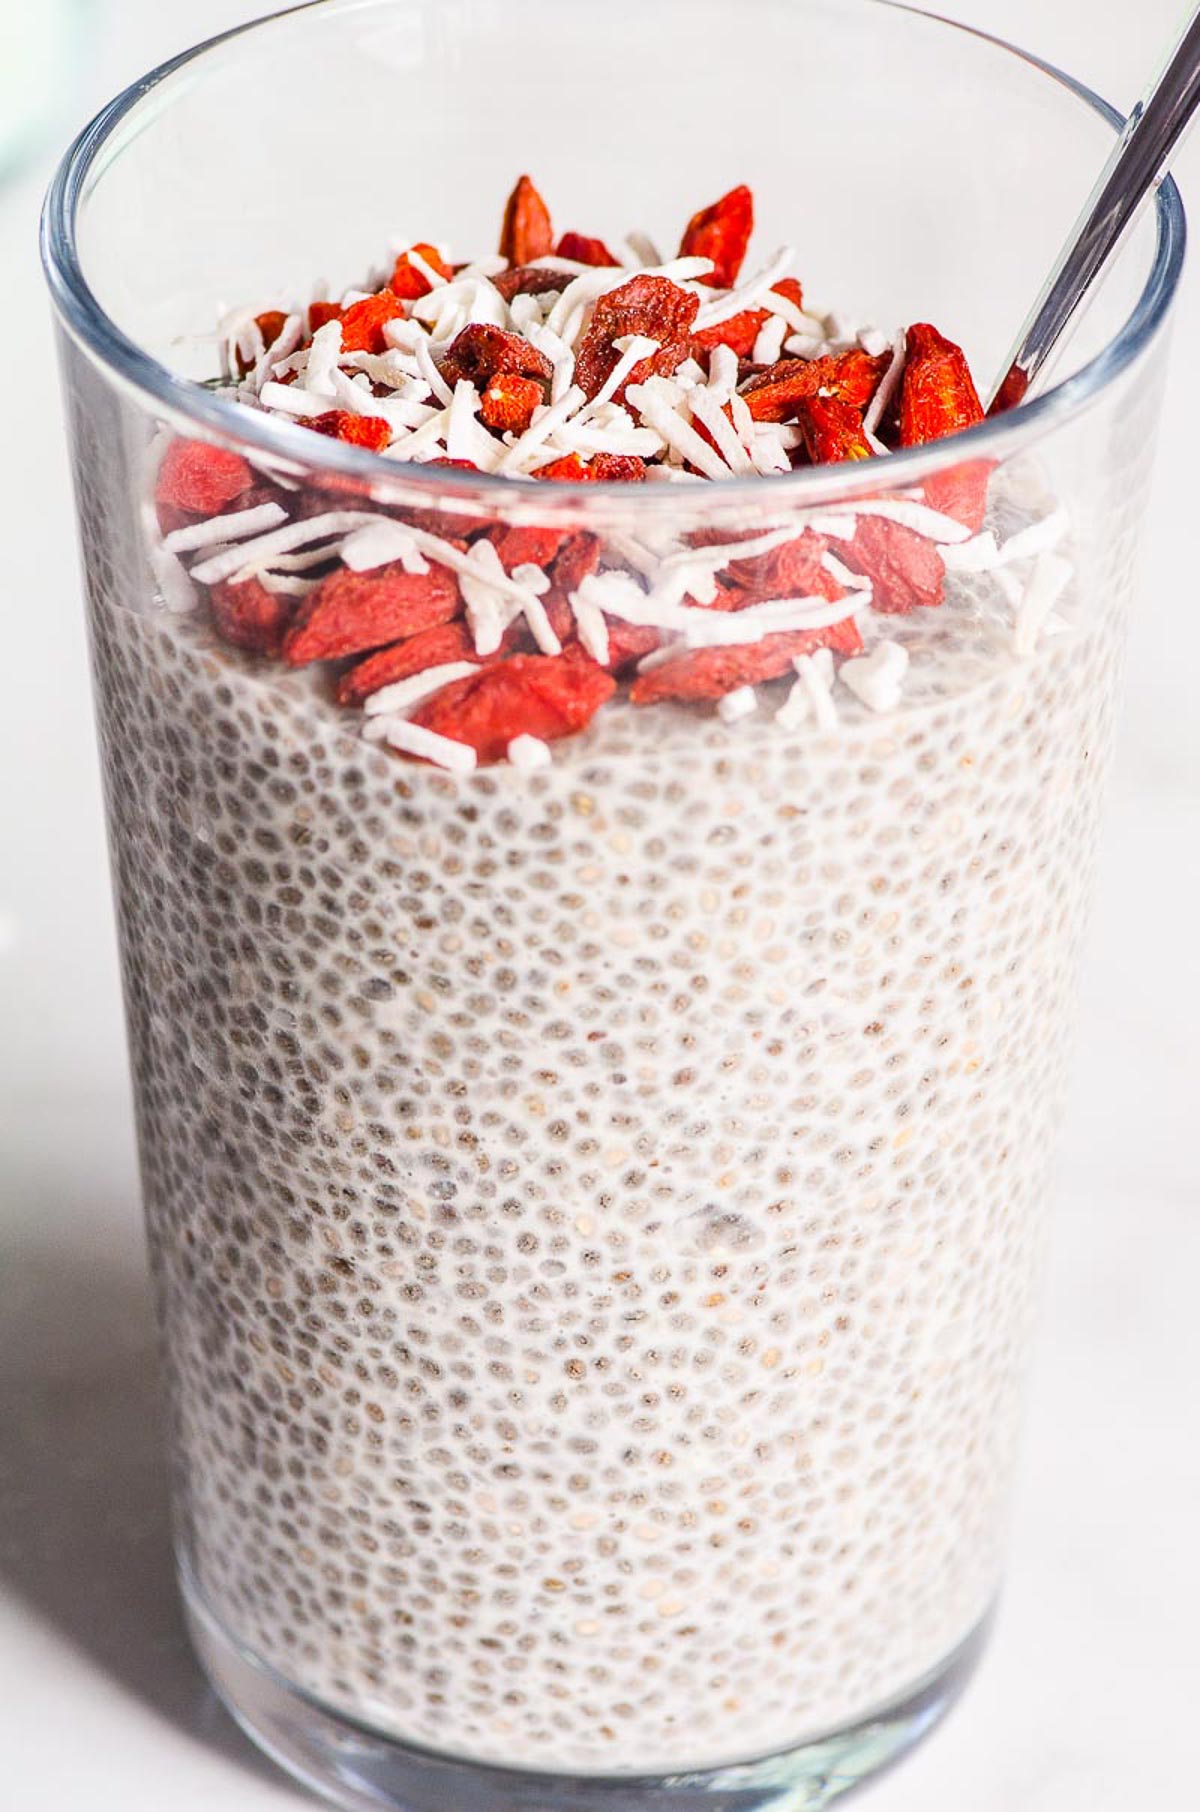 Chia pudding in a glass with goji berries, coconut flakes, chocolate chips on top.